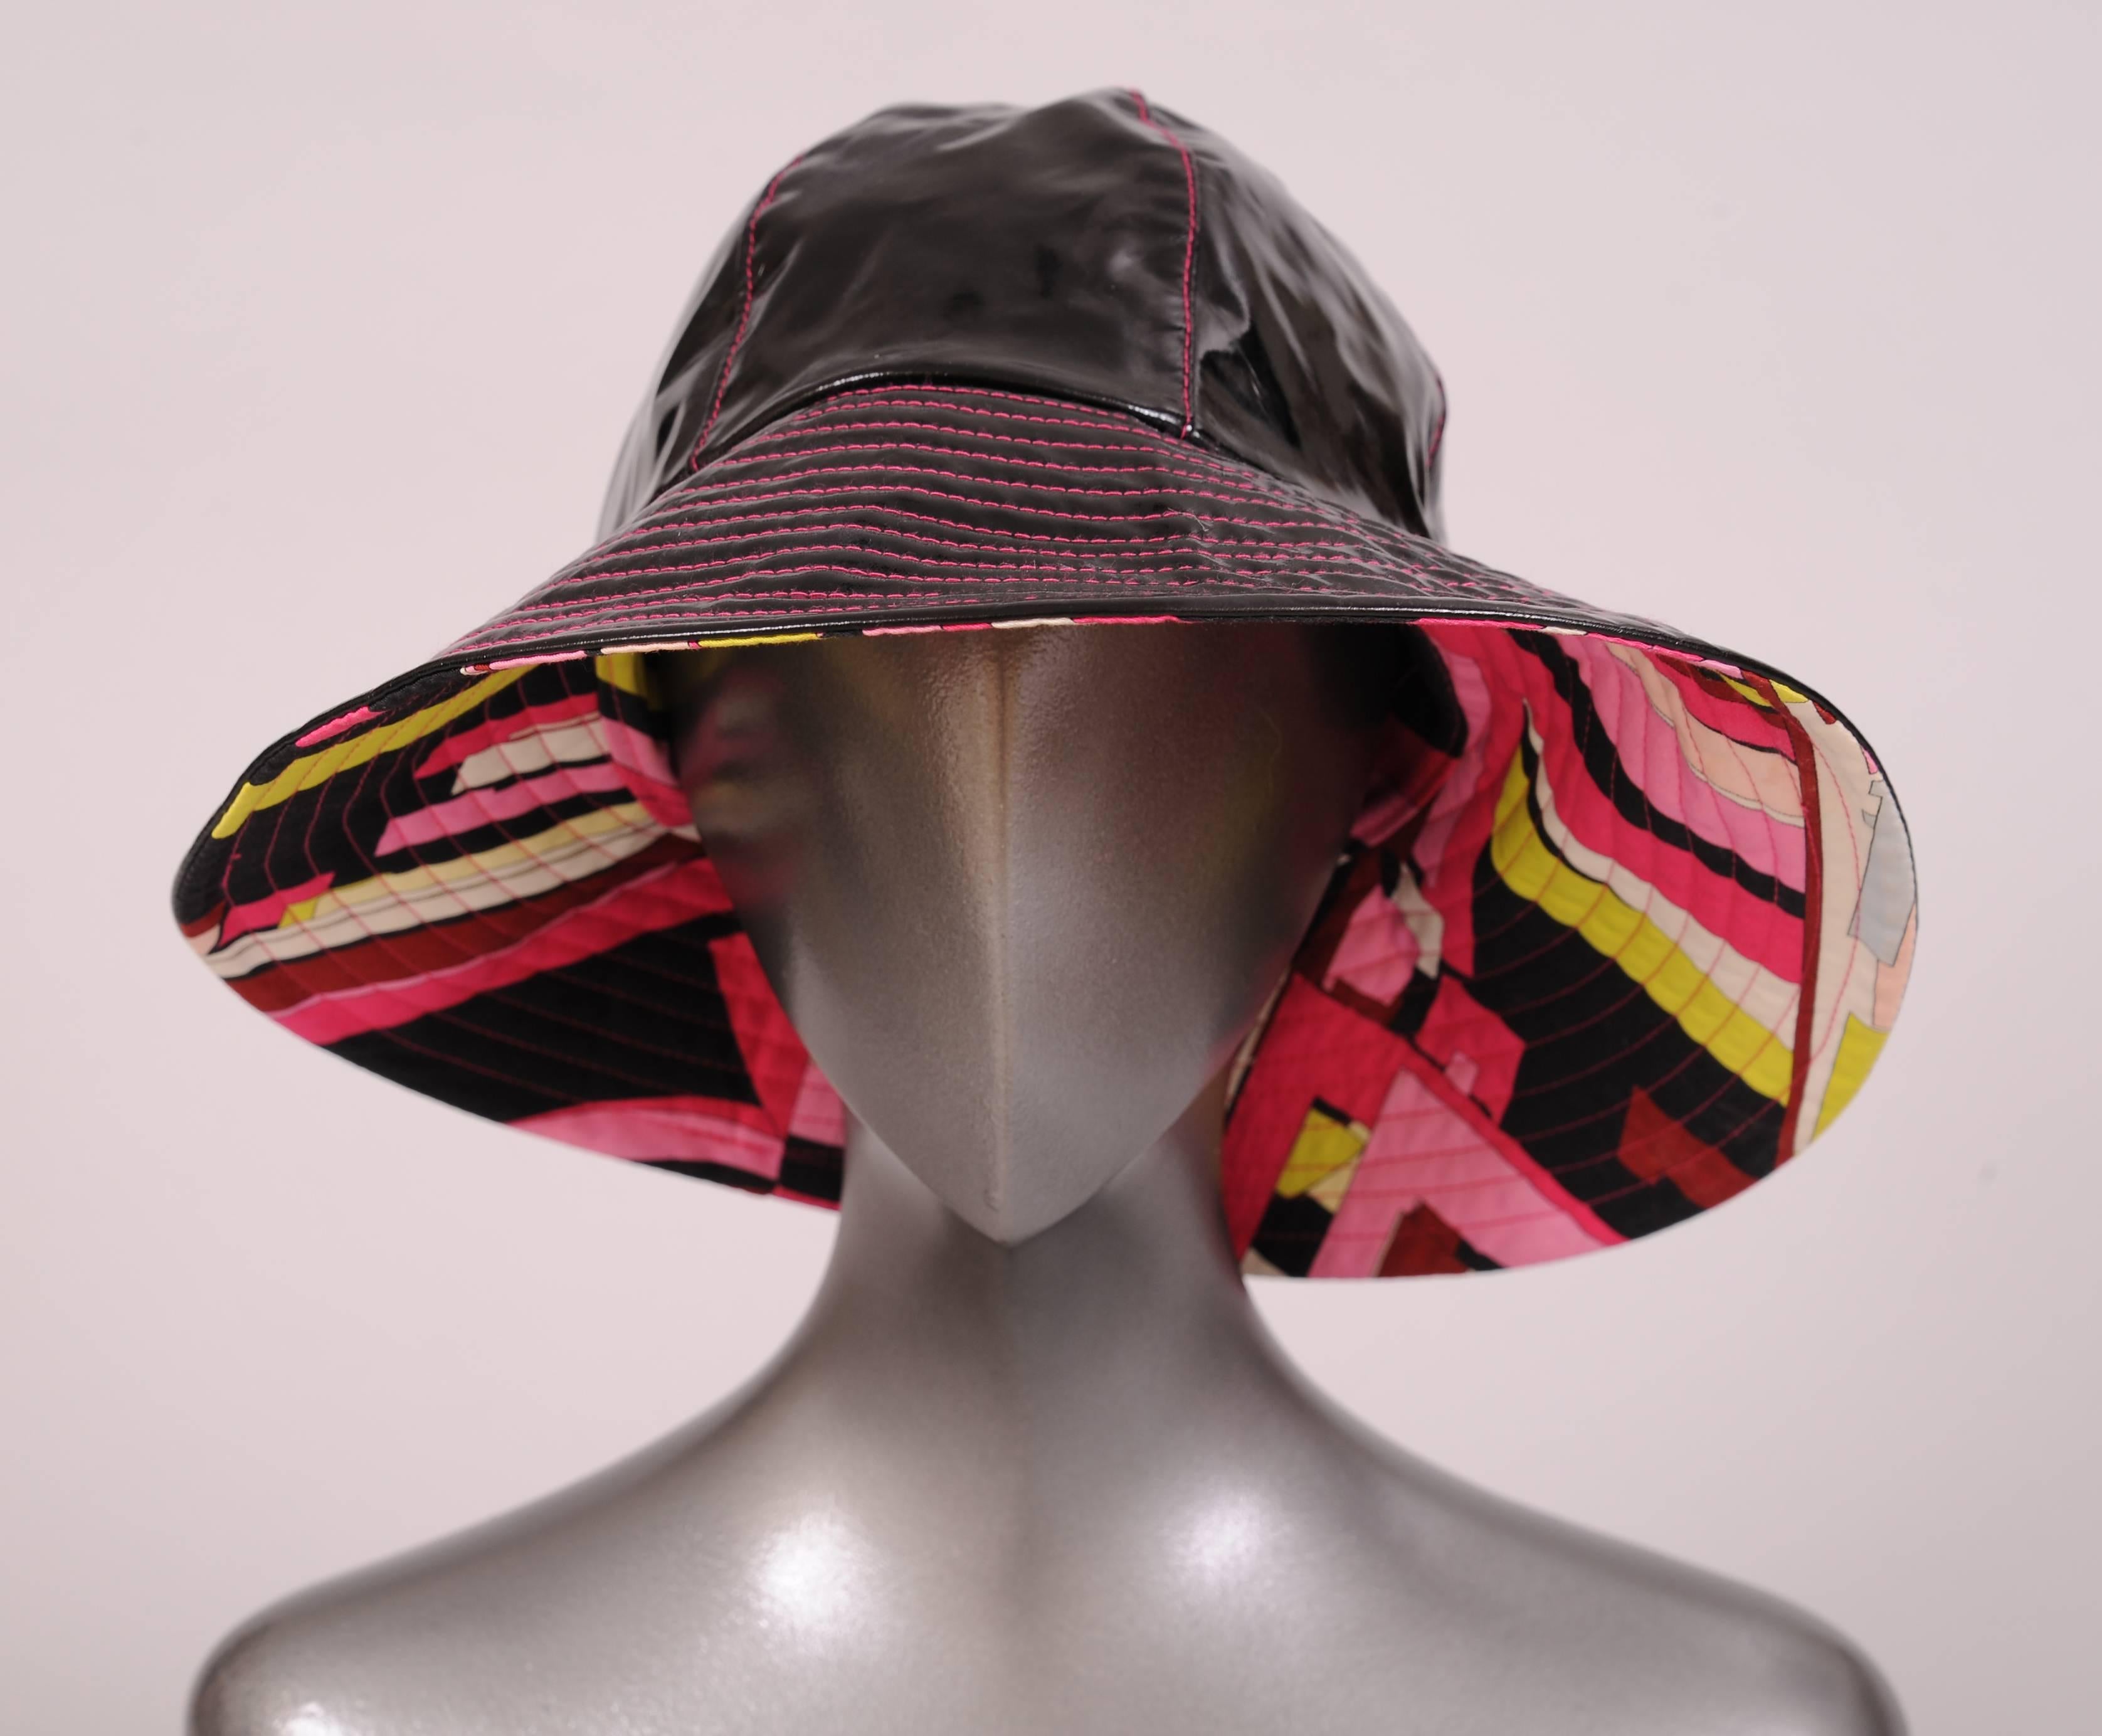 This hat will brighten the worst rainy day. A shiny black exterior is stitched with hot pink thread on the crown sections as well as the channel quilted brim. The interior is a burst of beautiful colors in a Pucci cotton print. Every shade of pink